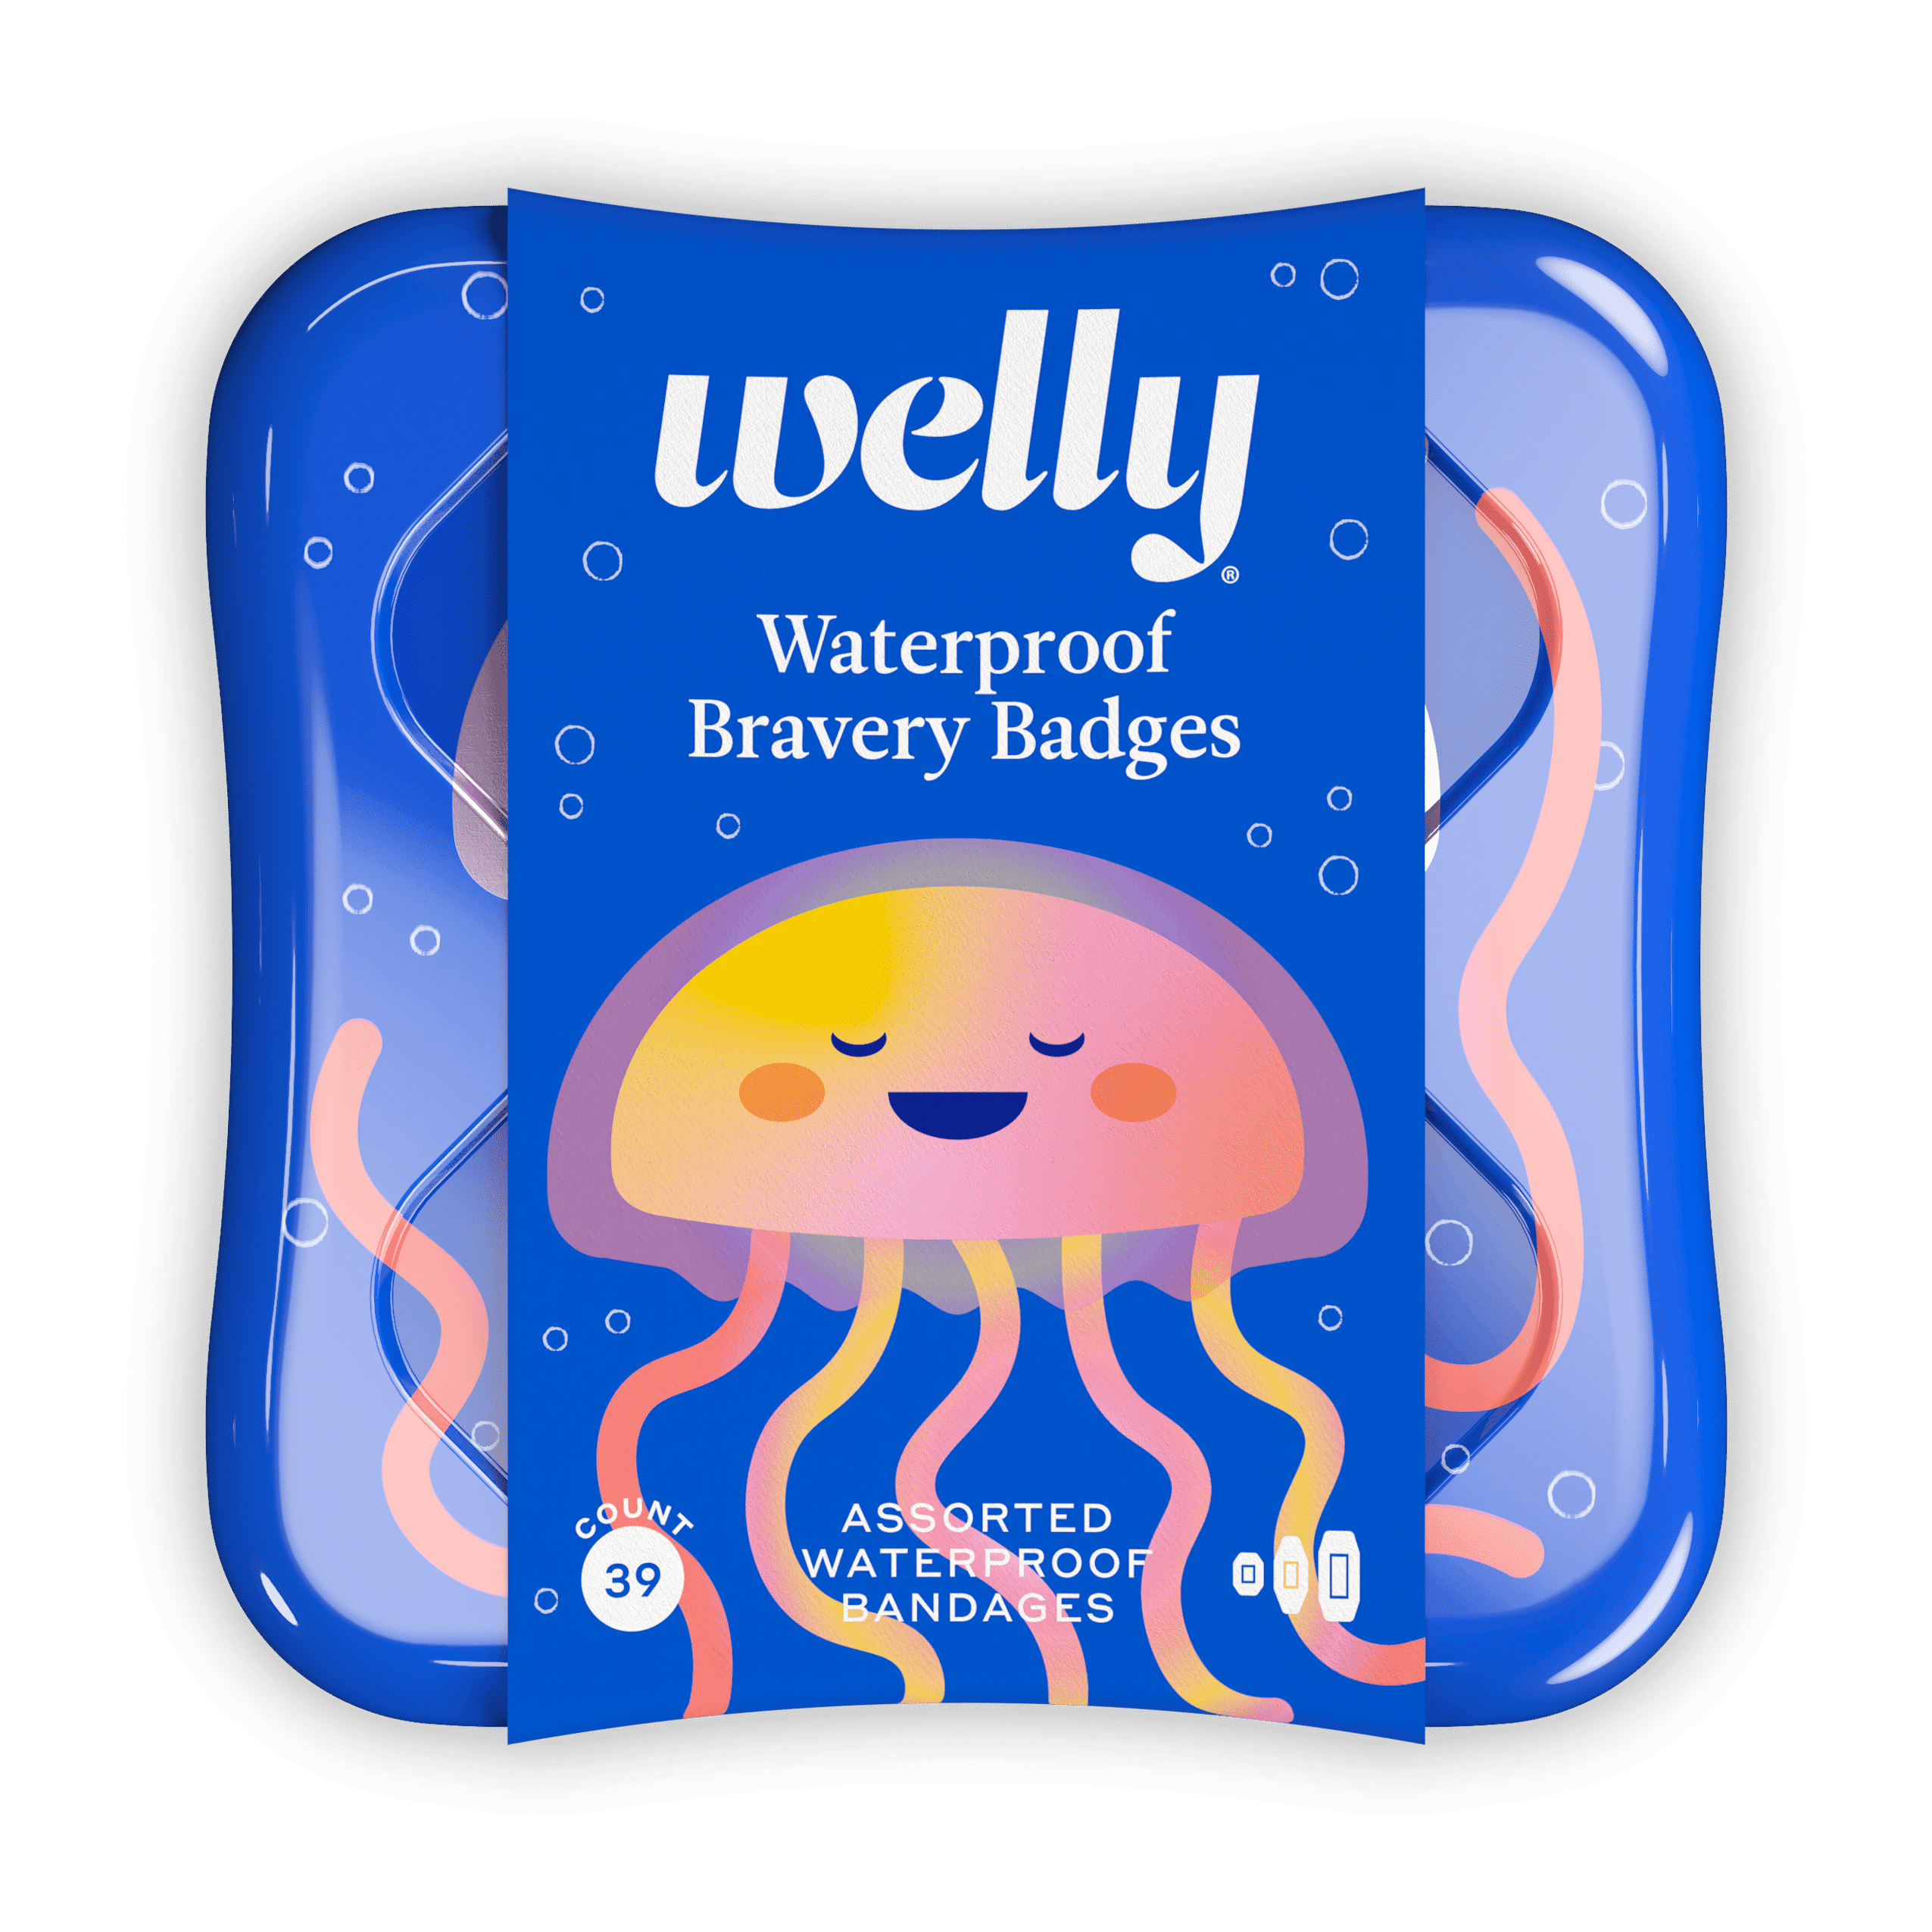 Welly Jellyfish Kids Waterproof Adhesive Bandages, Assorted, 39 Count